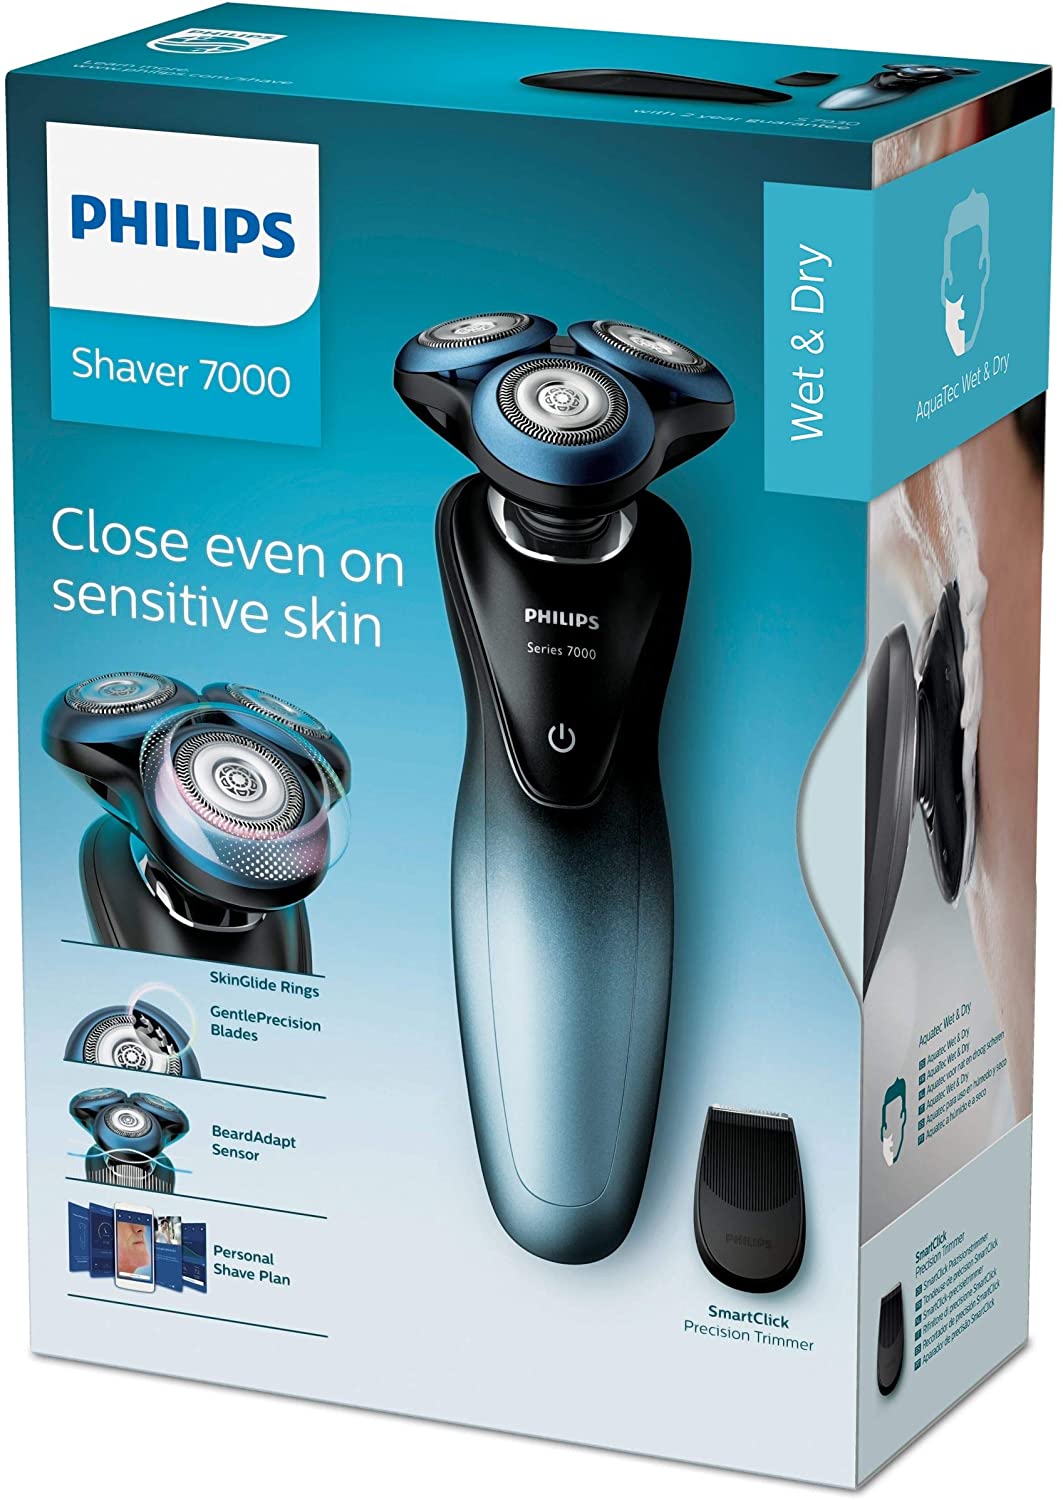 Philips Series 7000 Wet and Dry Electric Shaver in Bahrain - Halabh